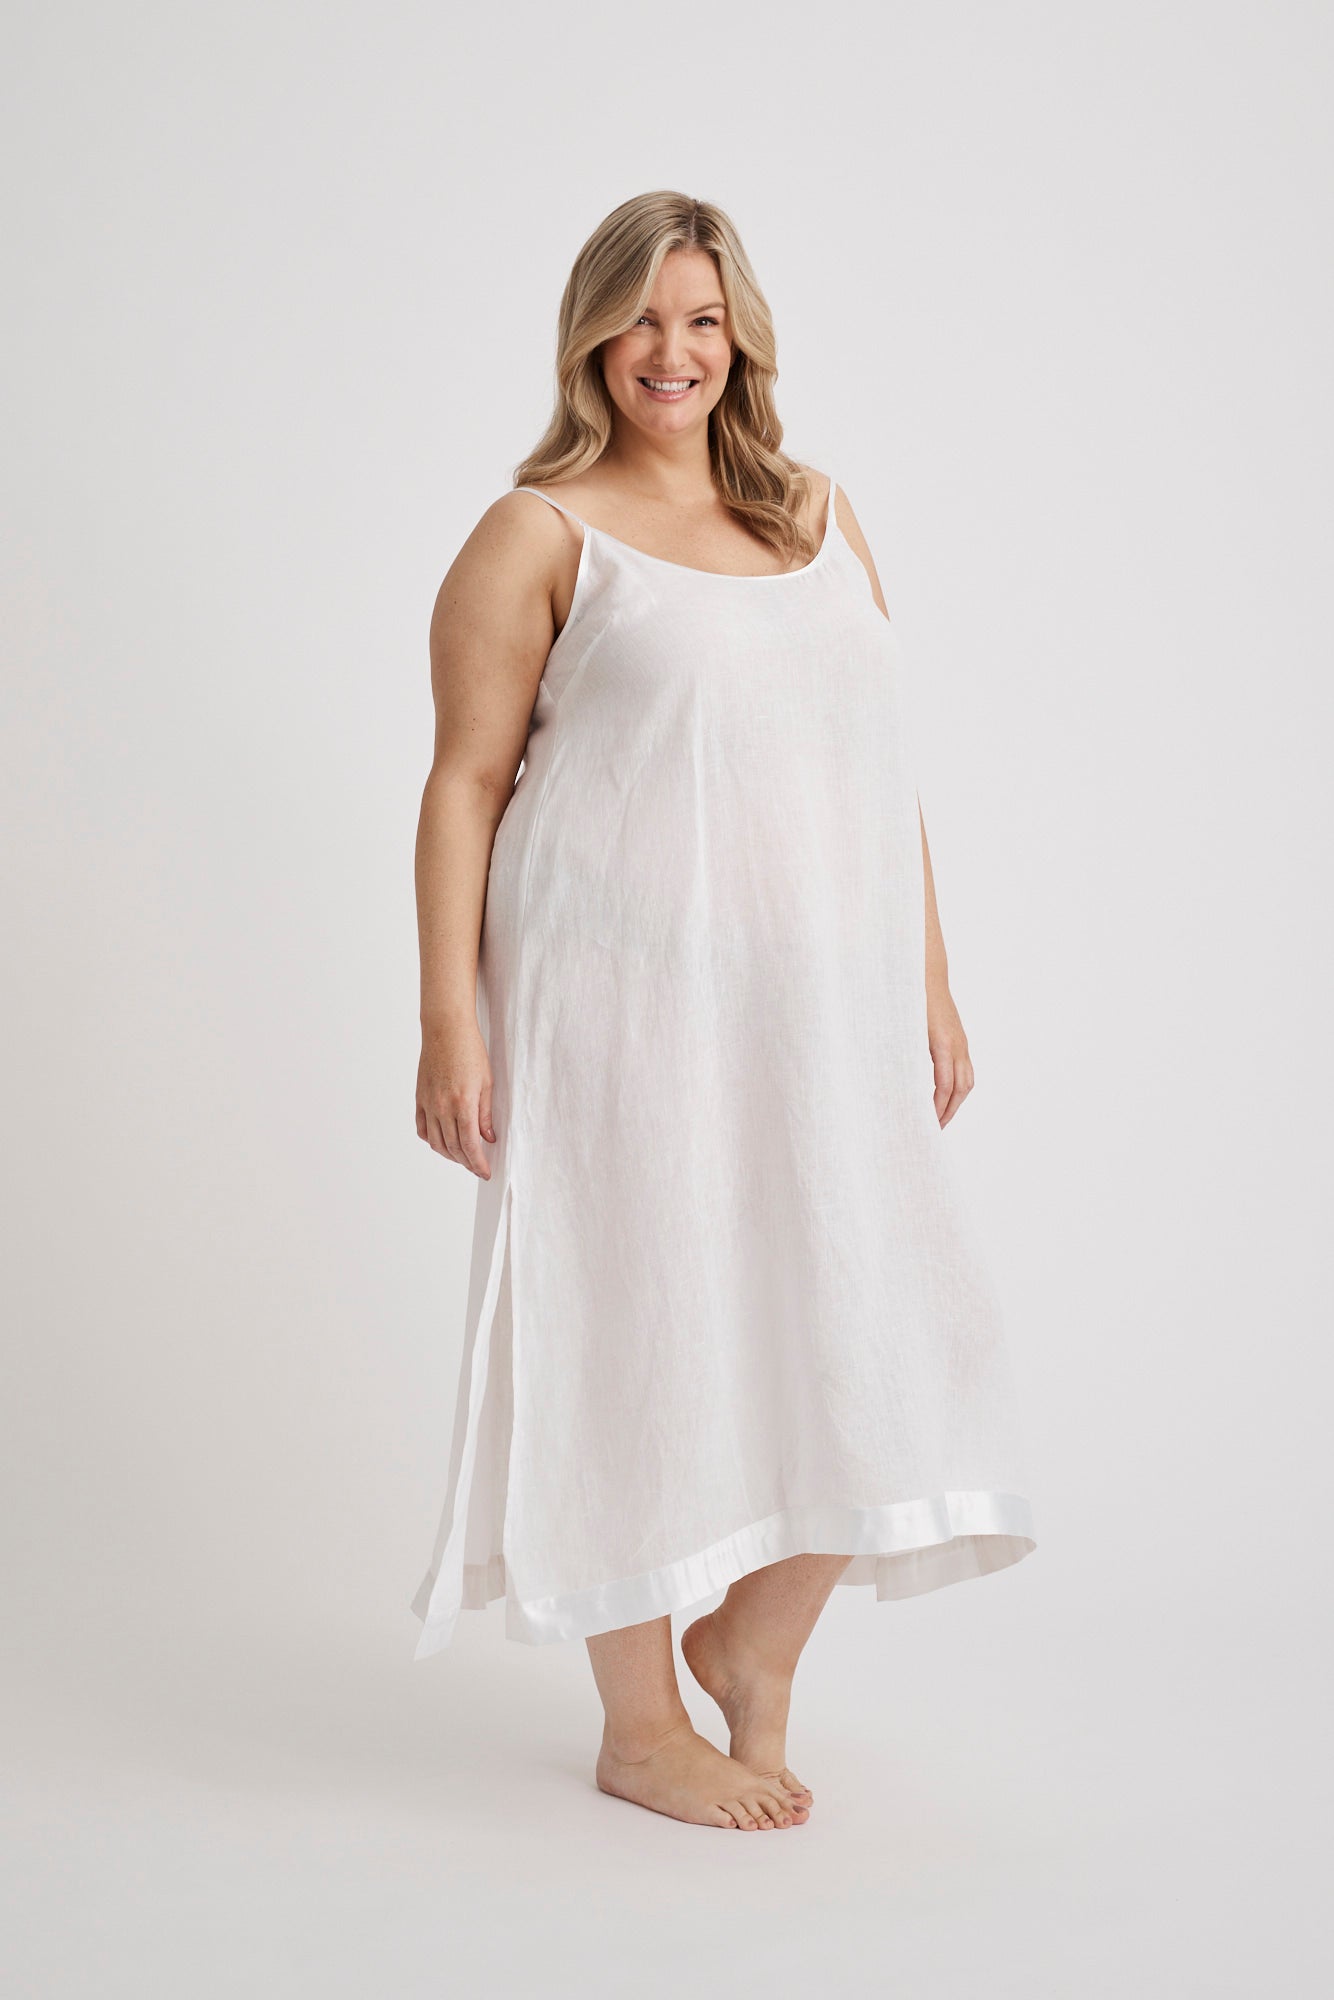 Finding Comfort in Hospital Stays: How Hank & Hera's Sleepwear Supports Women's Well-being